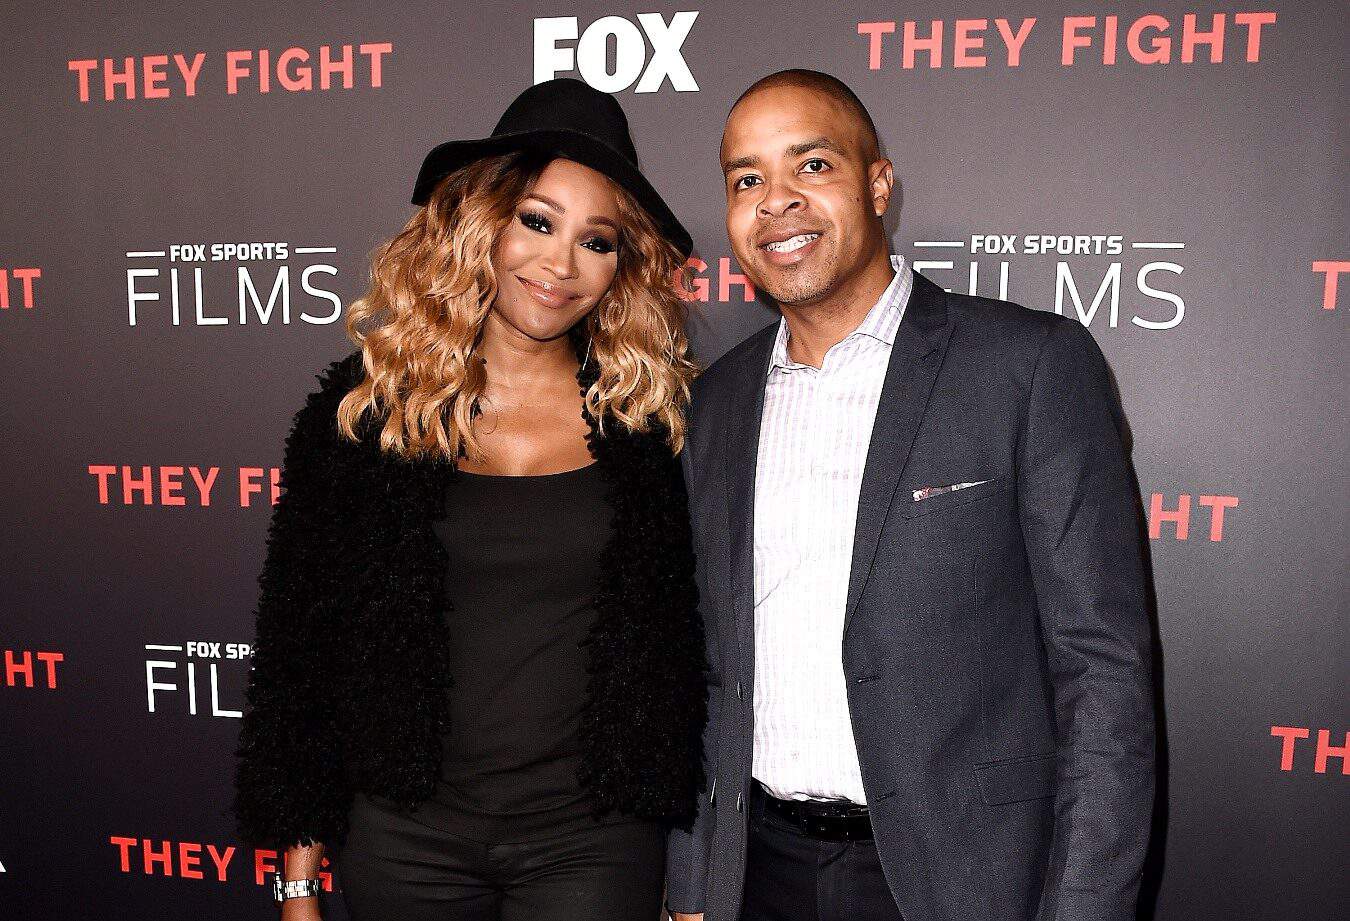 RHOA Alum Cynthia Bailey Accuses Mike Hill of Cheating in Court Docs Then Backtracks as He Responds and Their Divorce is Settled